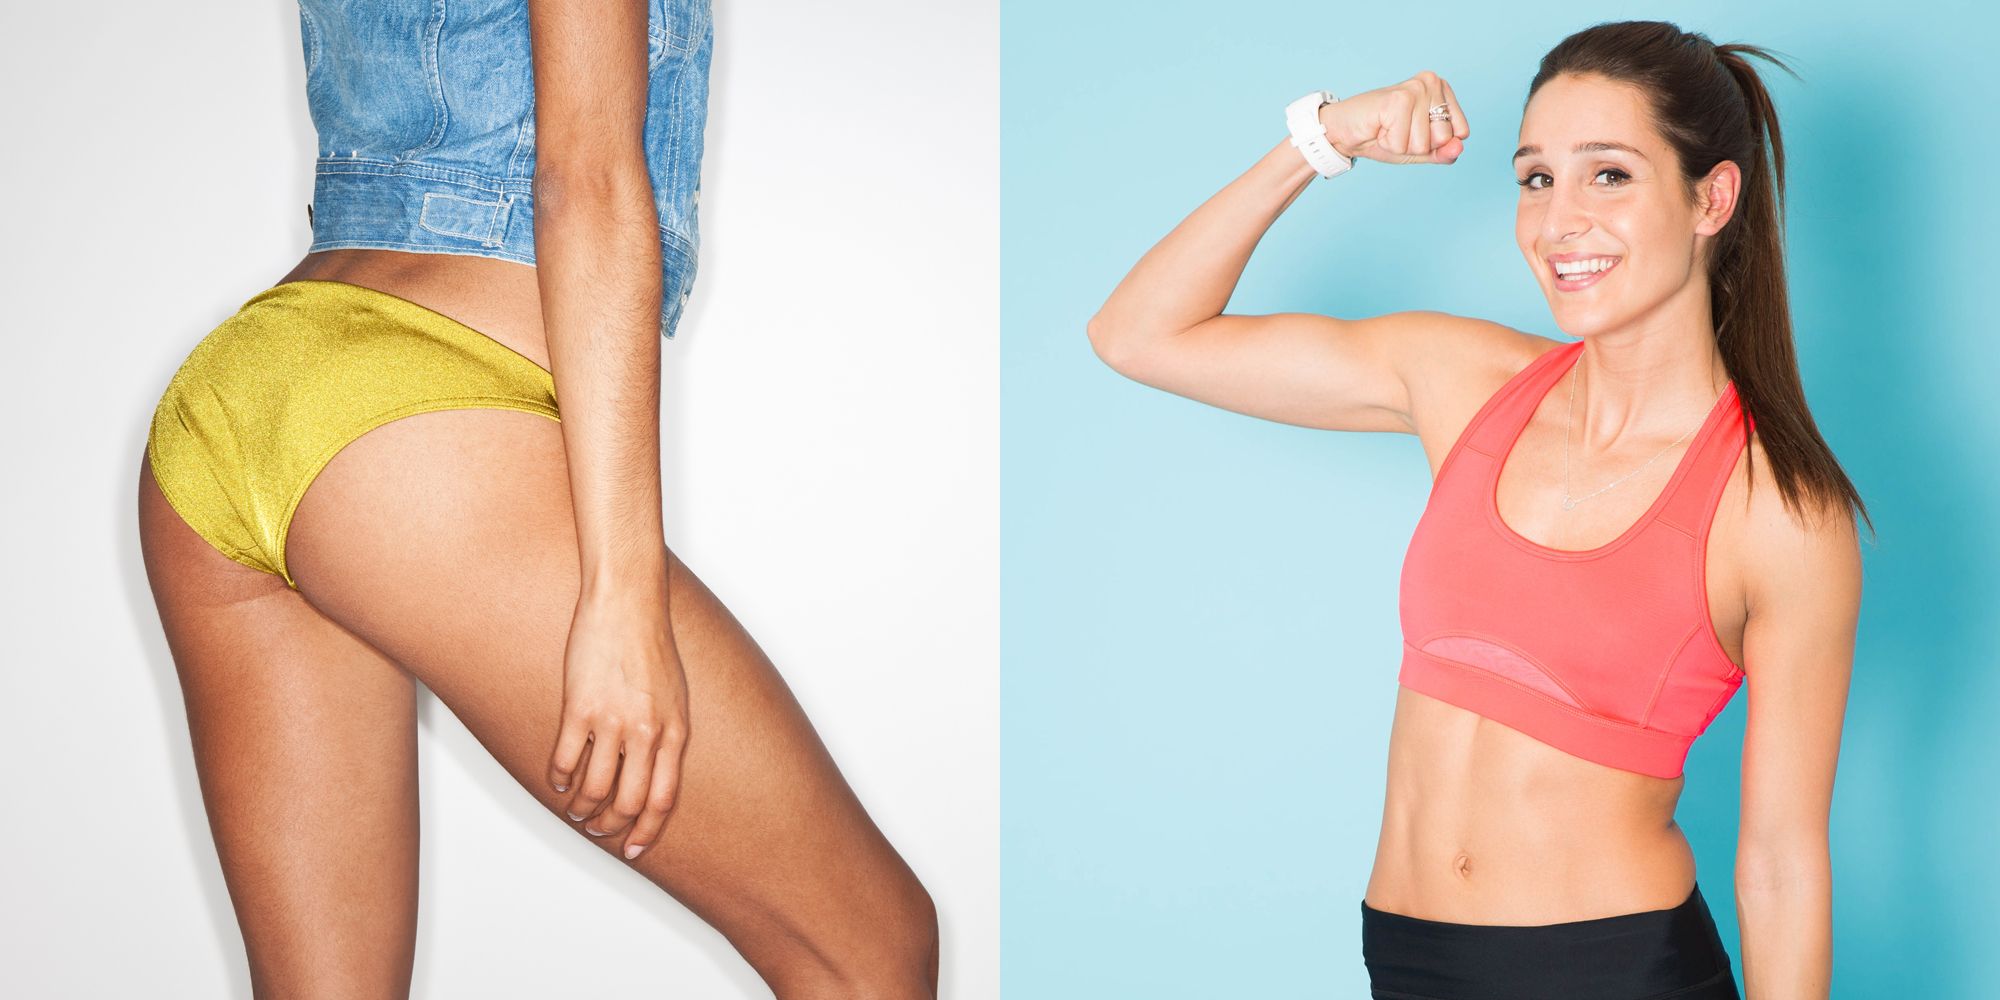 BBG Butt Workout from Kayla Itsines: 8 Moves That Would Be in the BBG Butt  Workout, According to Kayla Itsines